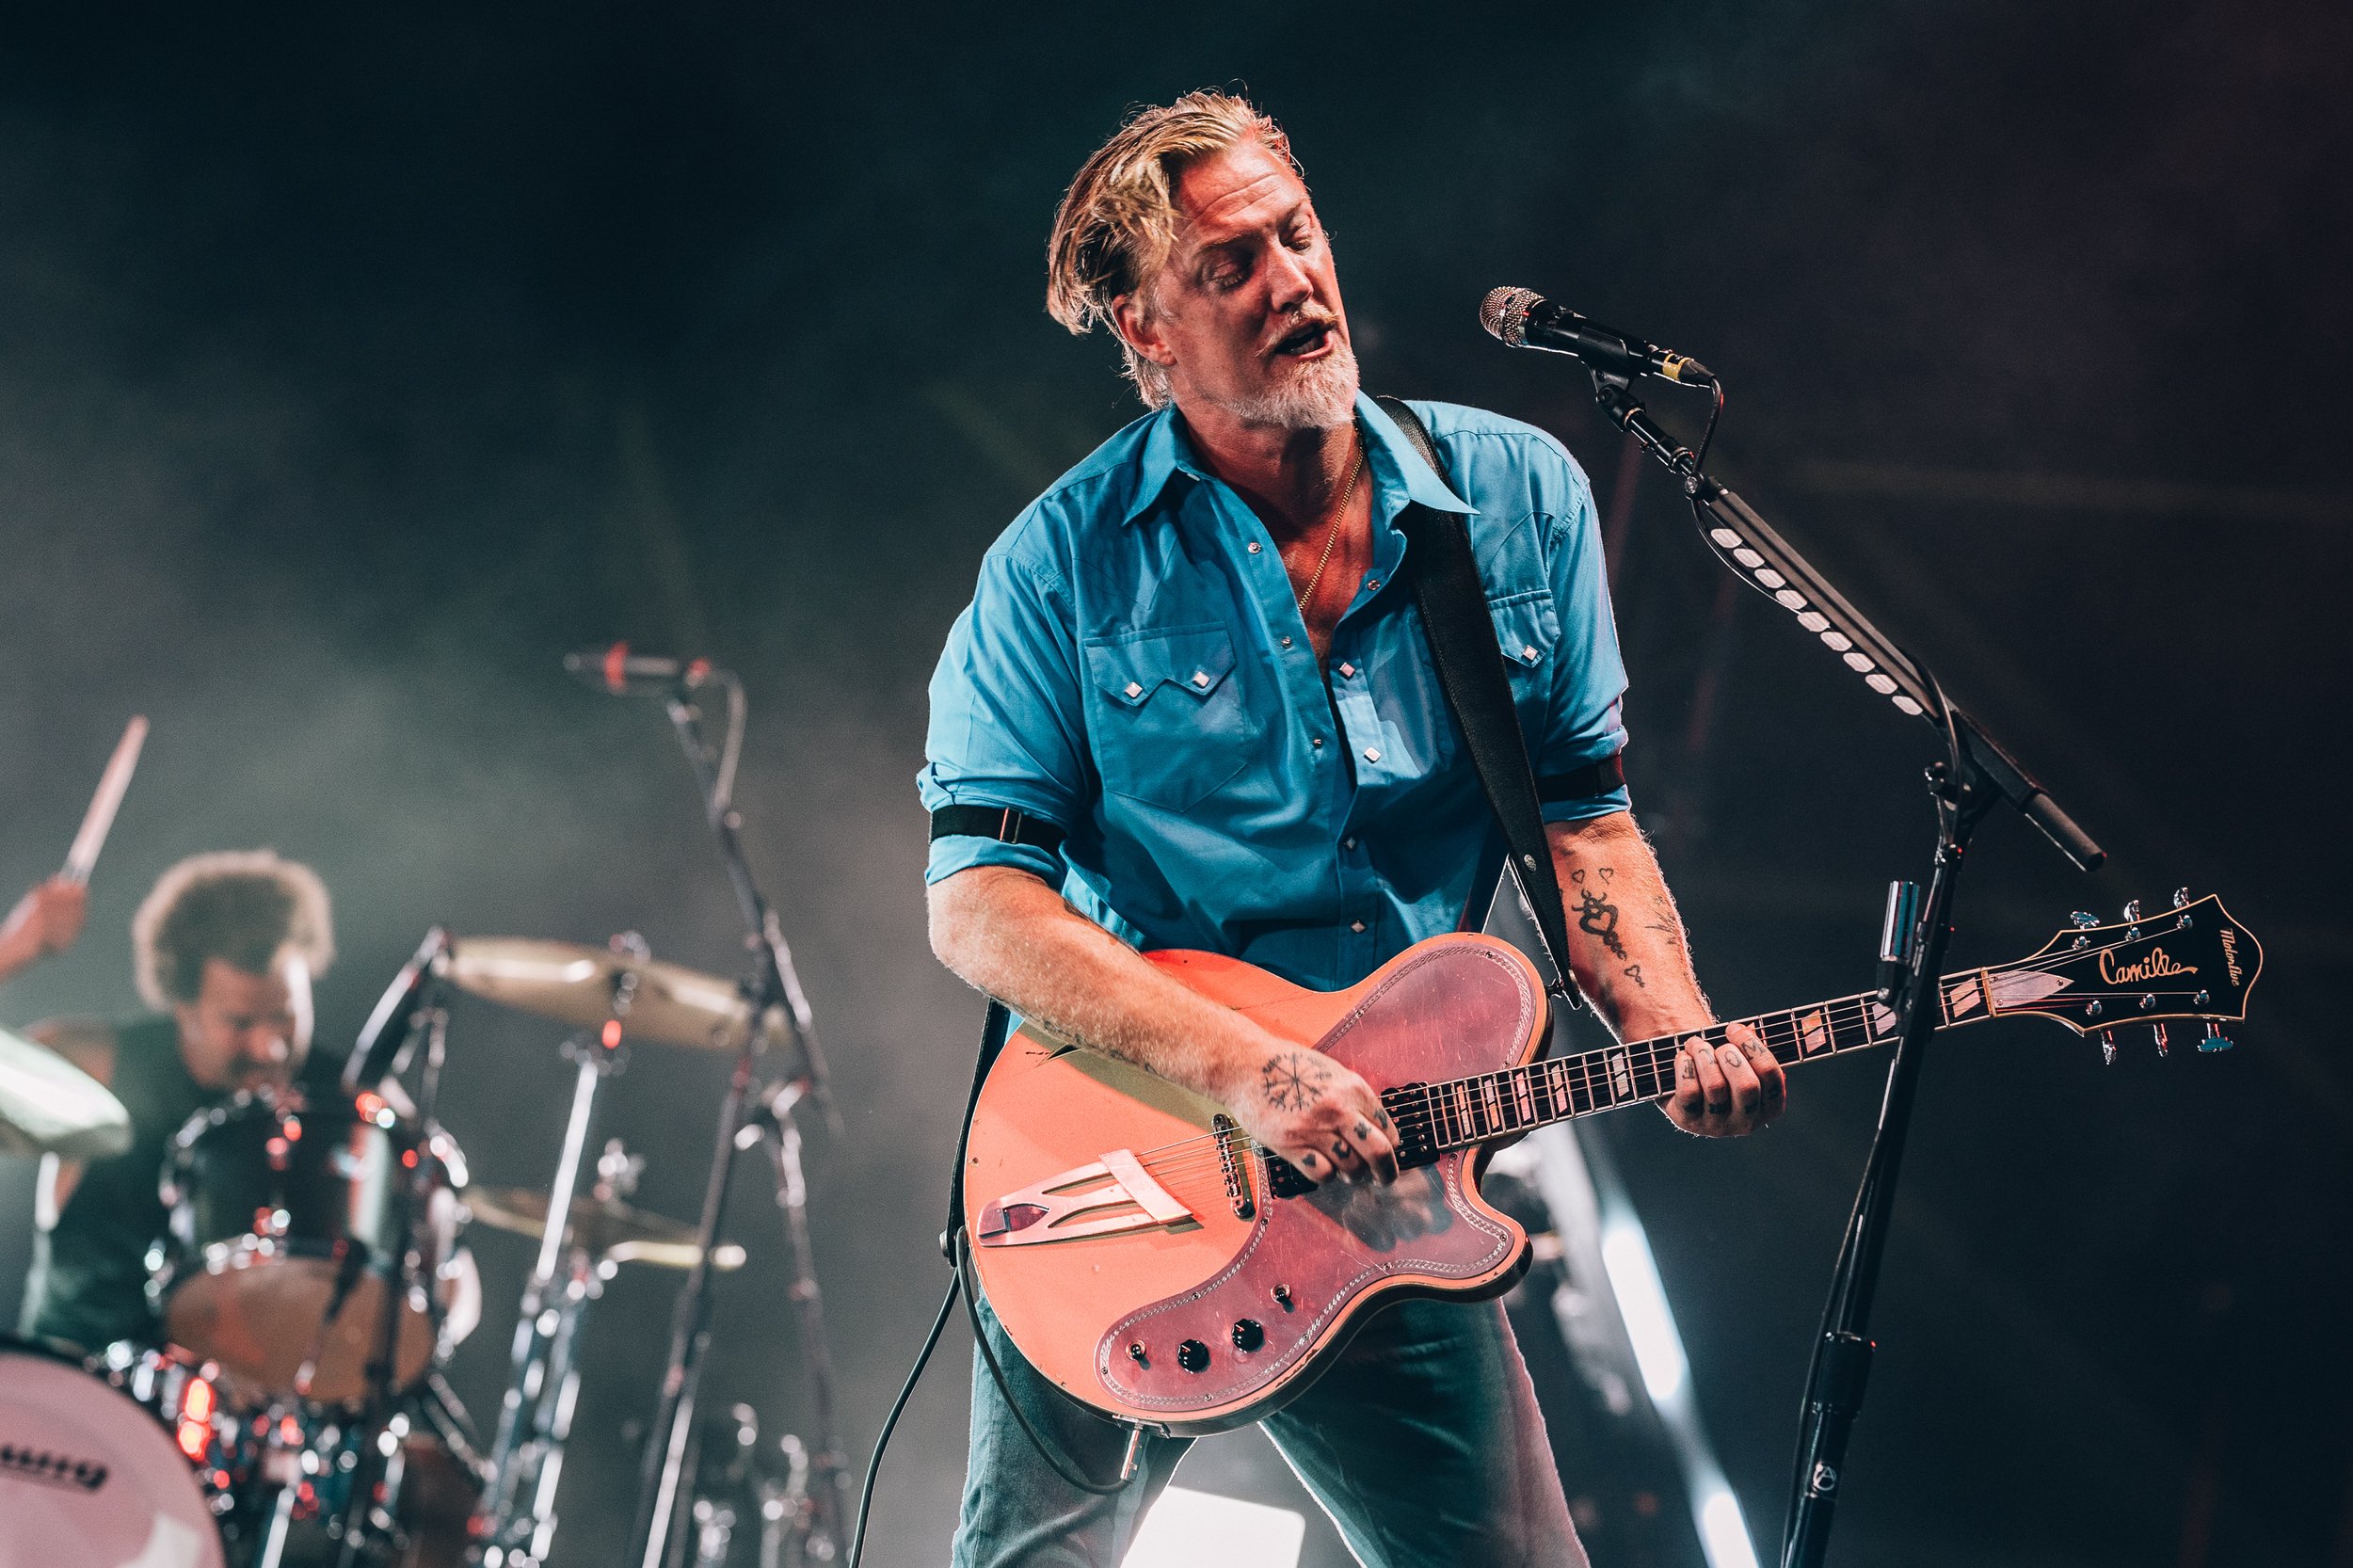 20230707_NOS_ALIVE_QUEENS_OF_THE_STONE_AGE_JOAOSILVAGD_08532.jpg